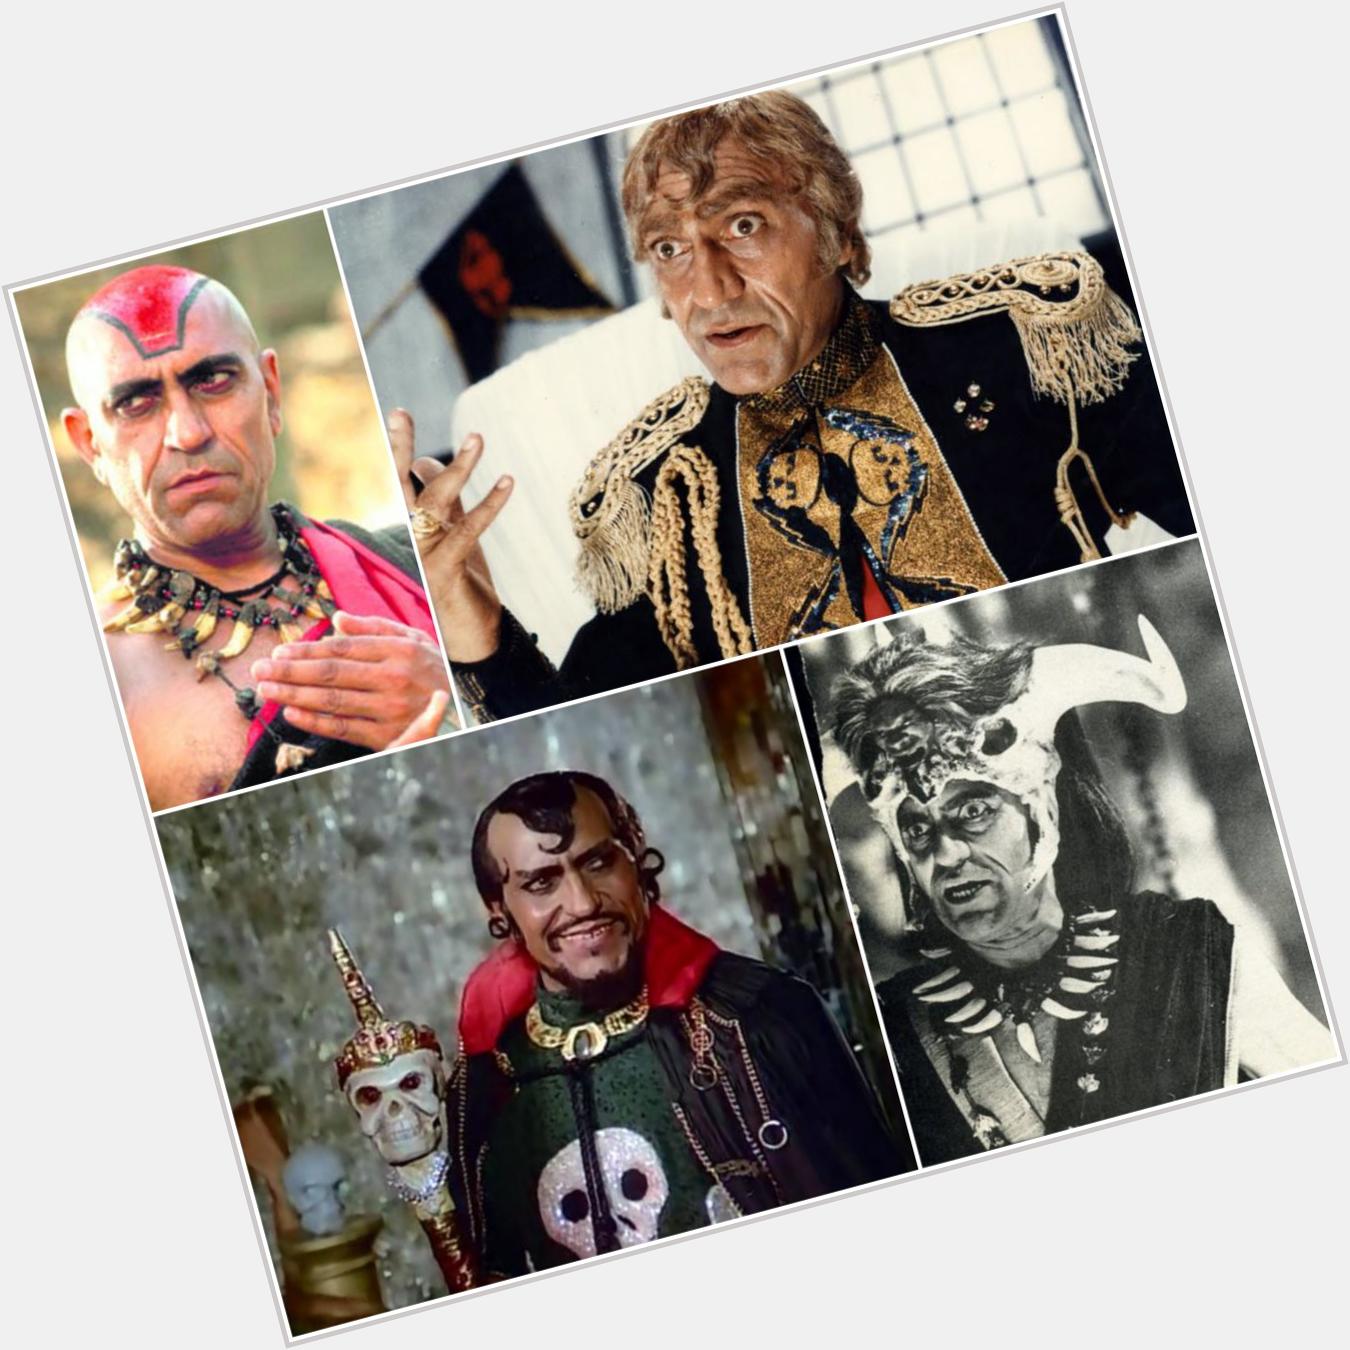 A Villian who made us LaughnCry-We Love to Hate  AMRISH PURI Happy BDay  